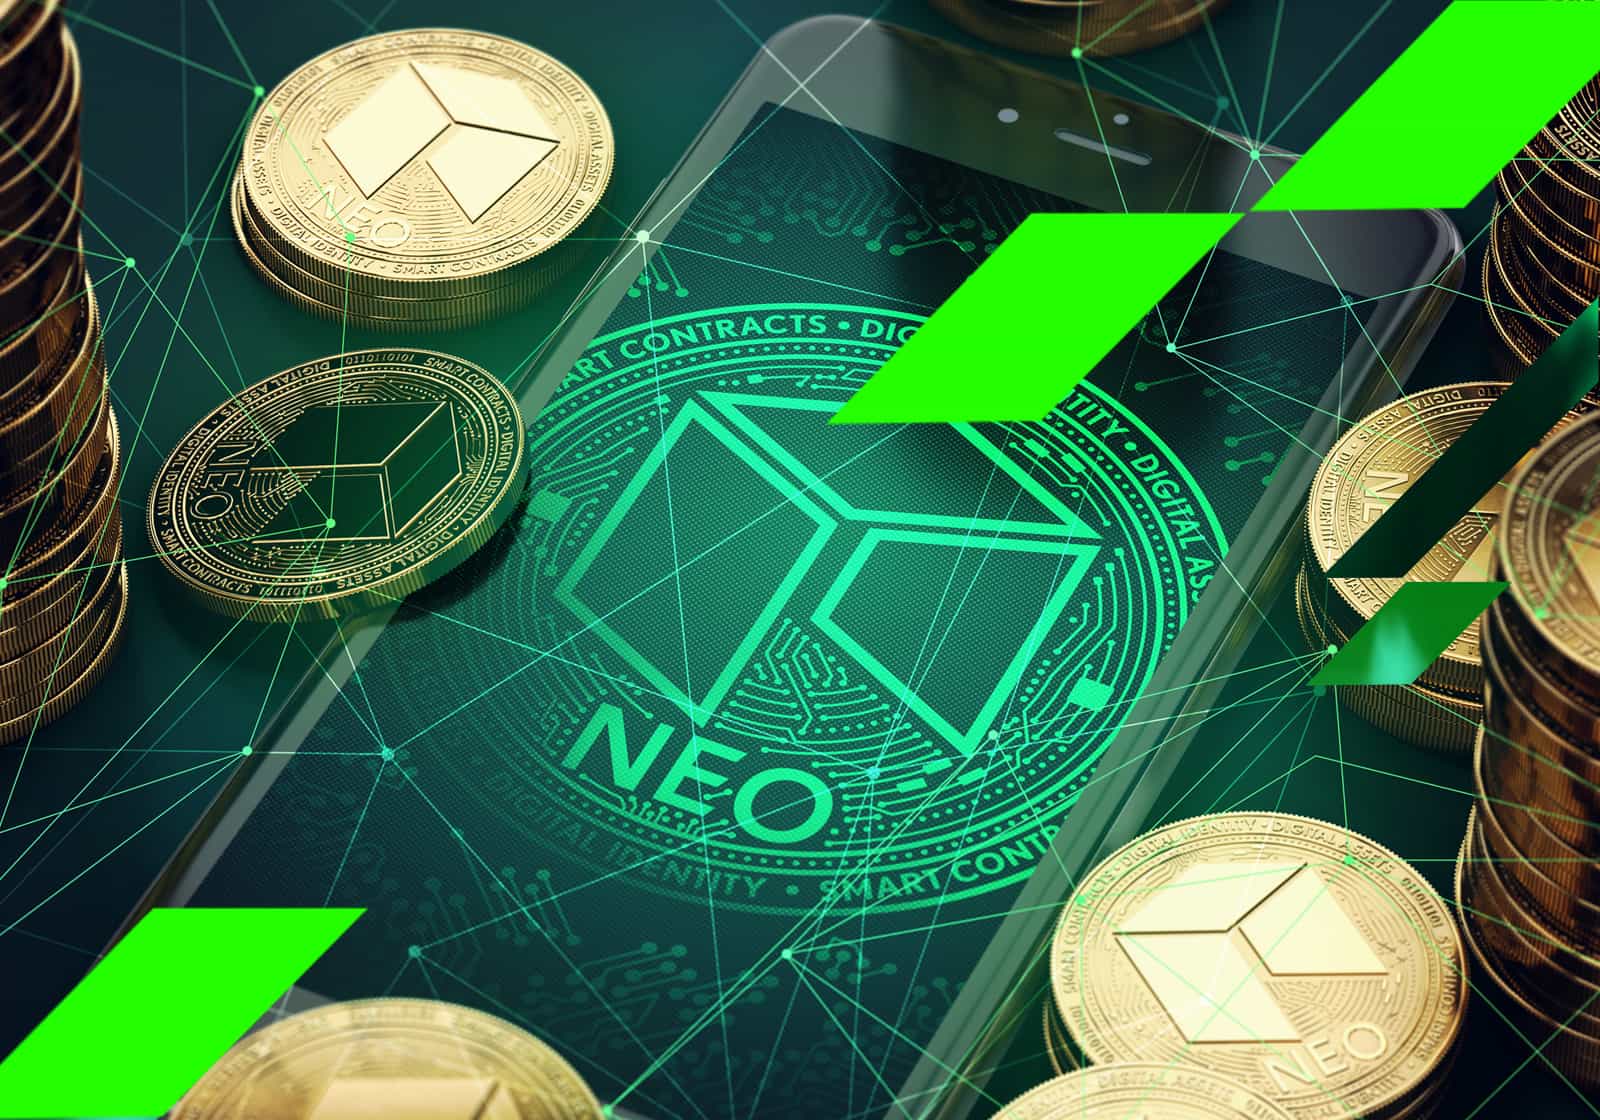 Neo cryptocurrency official website 0.01610100 btc usd